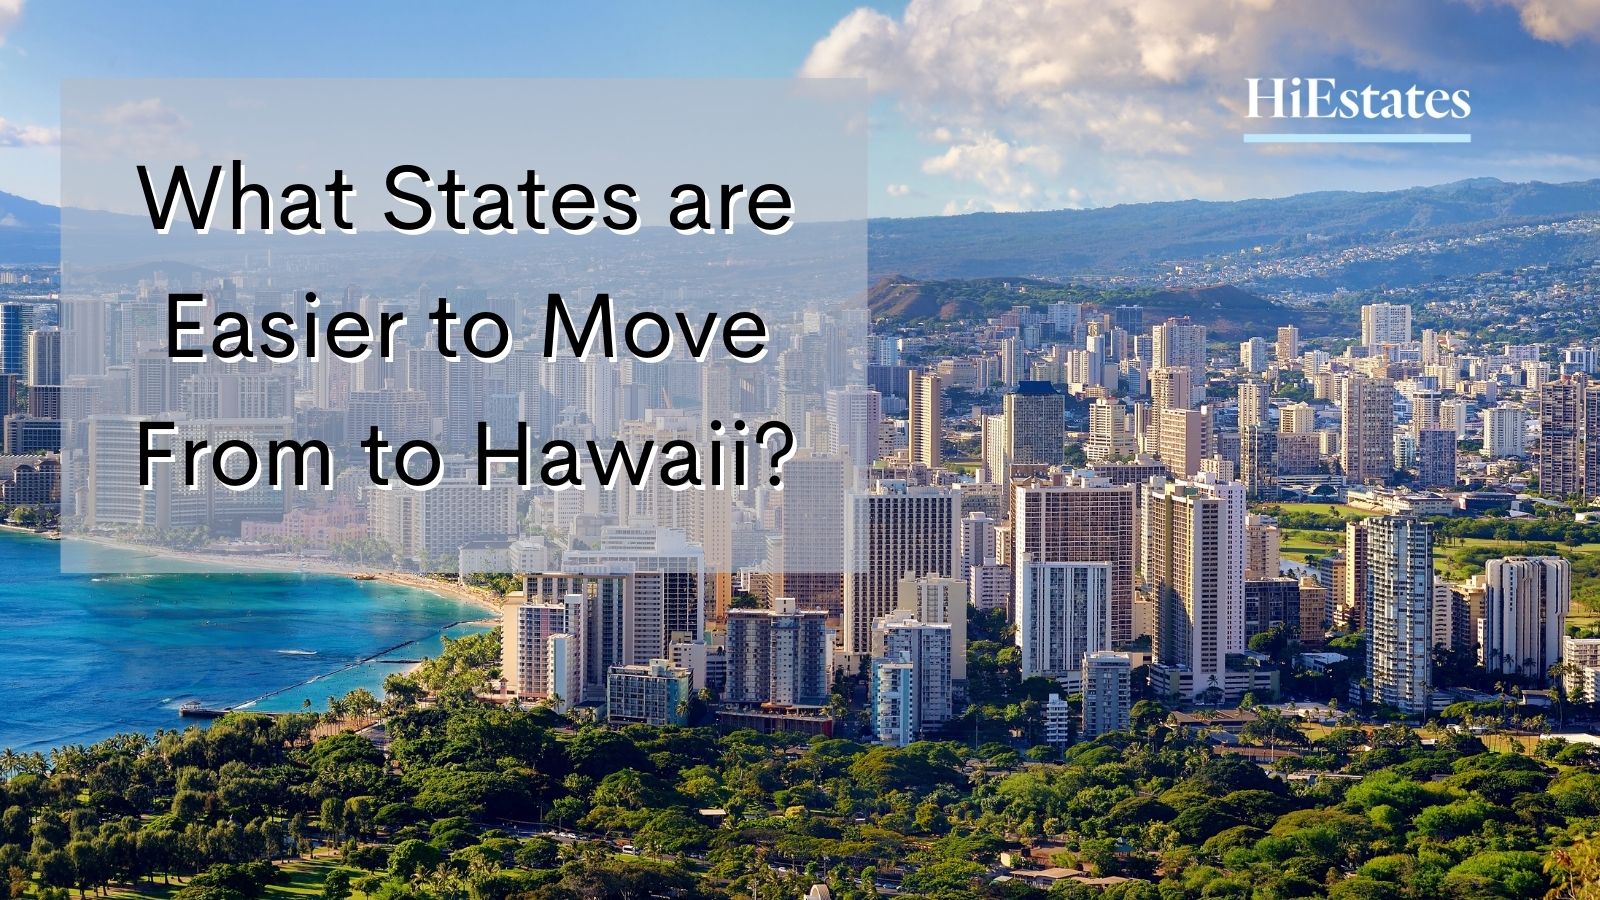 What States are Easier to Move From to Hawaii